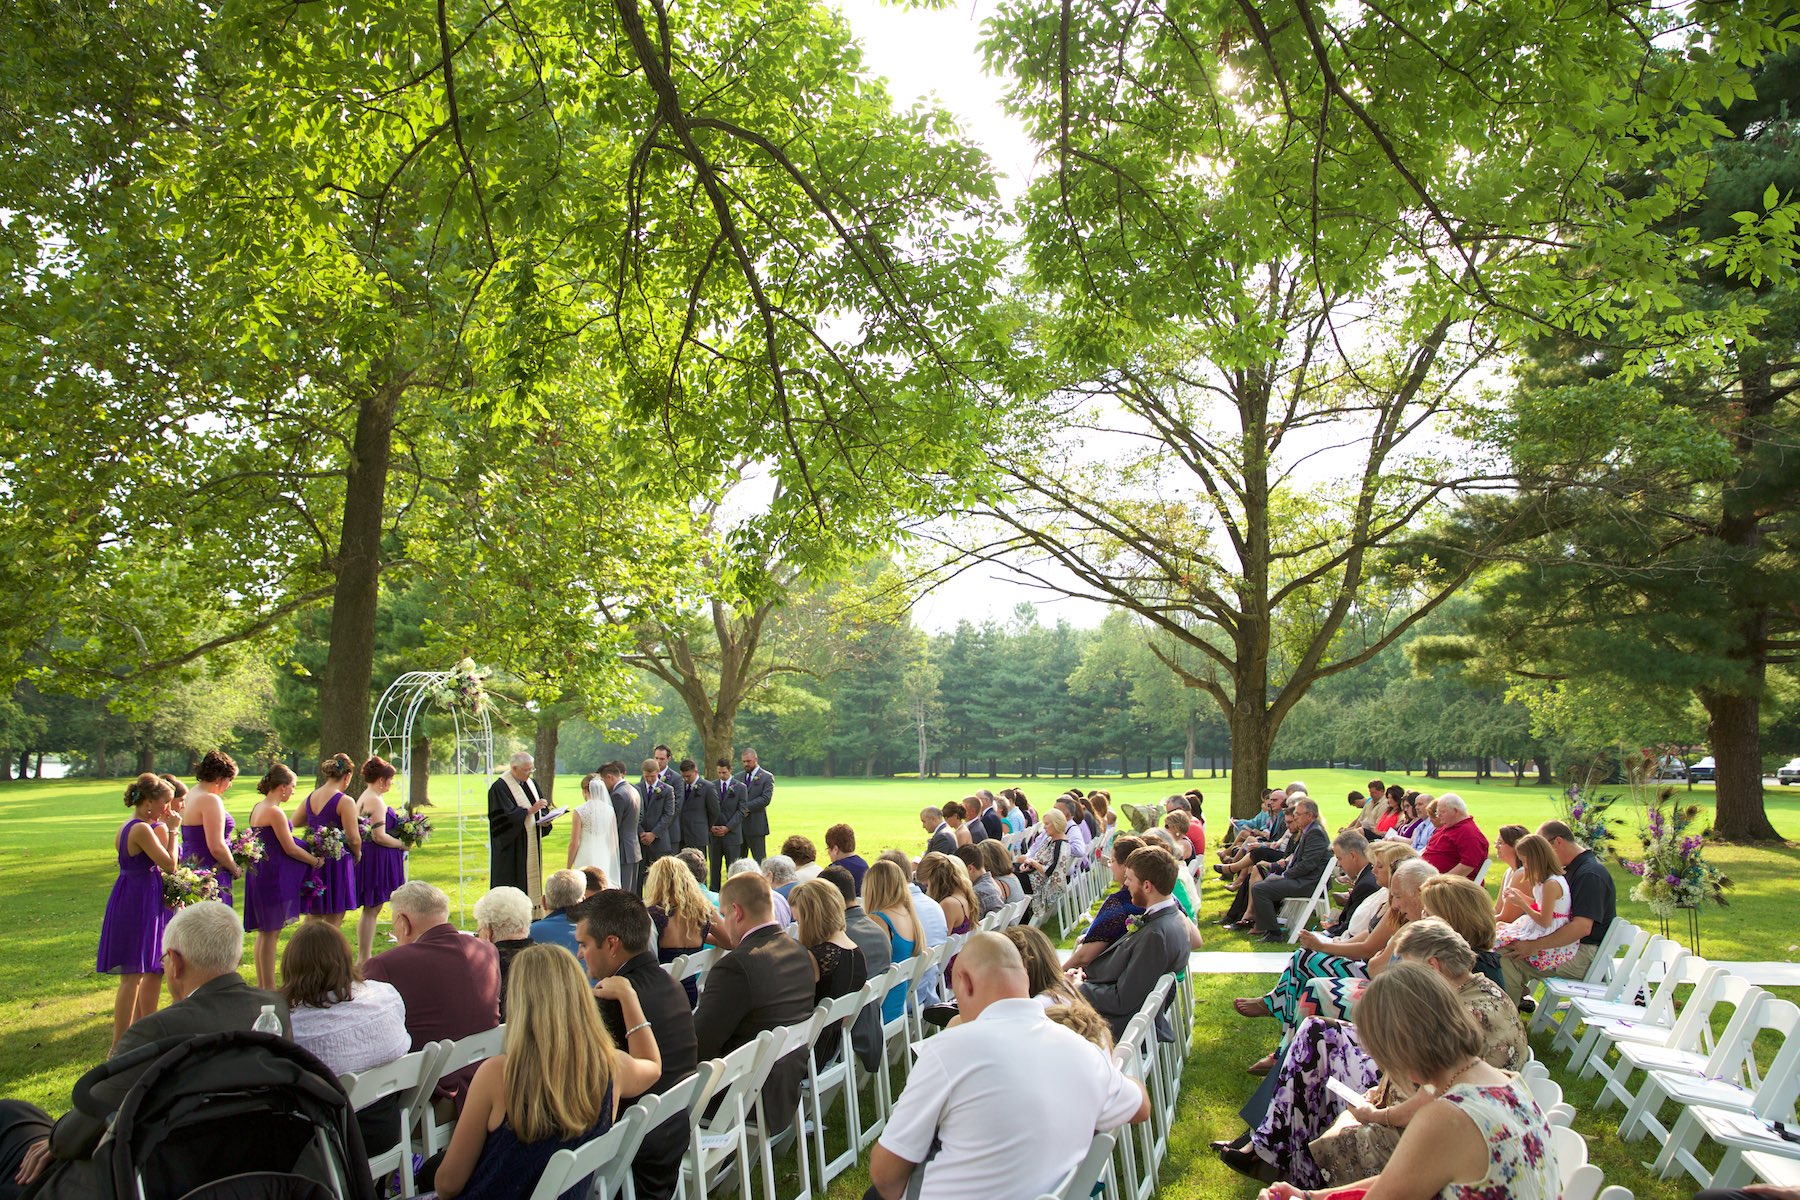 Outdoor wedding ceremony beneath the trees at the Jacksonville Illinois Country Club. Wedding photography by Steve & Tiffany Warmowski.